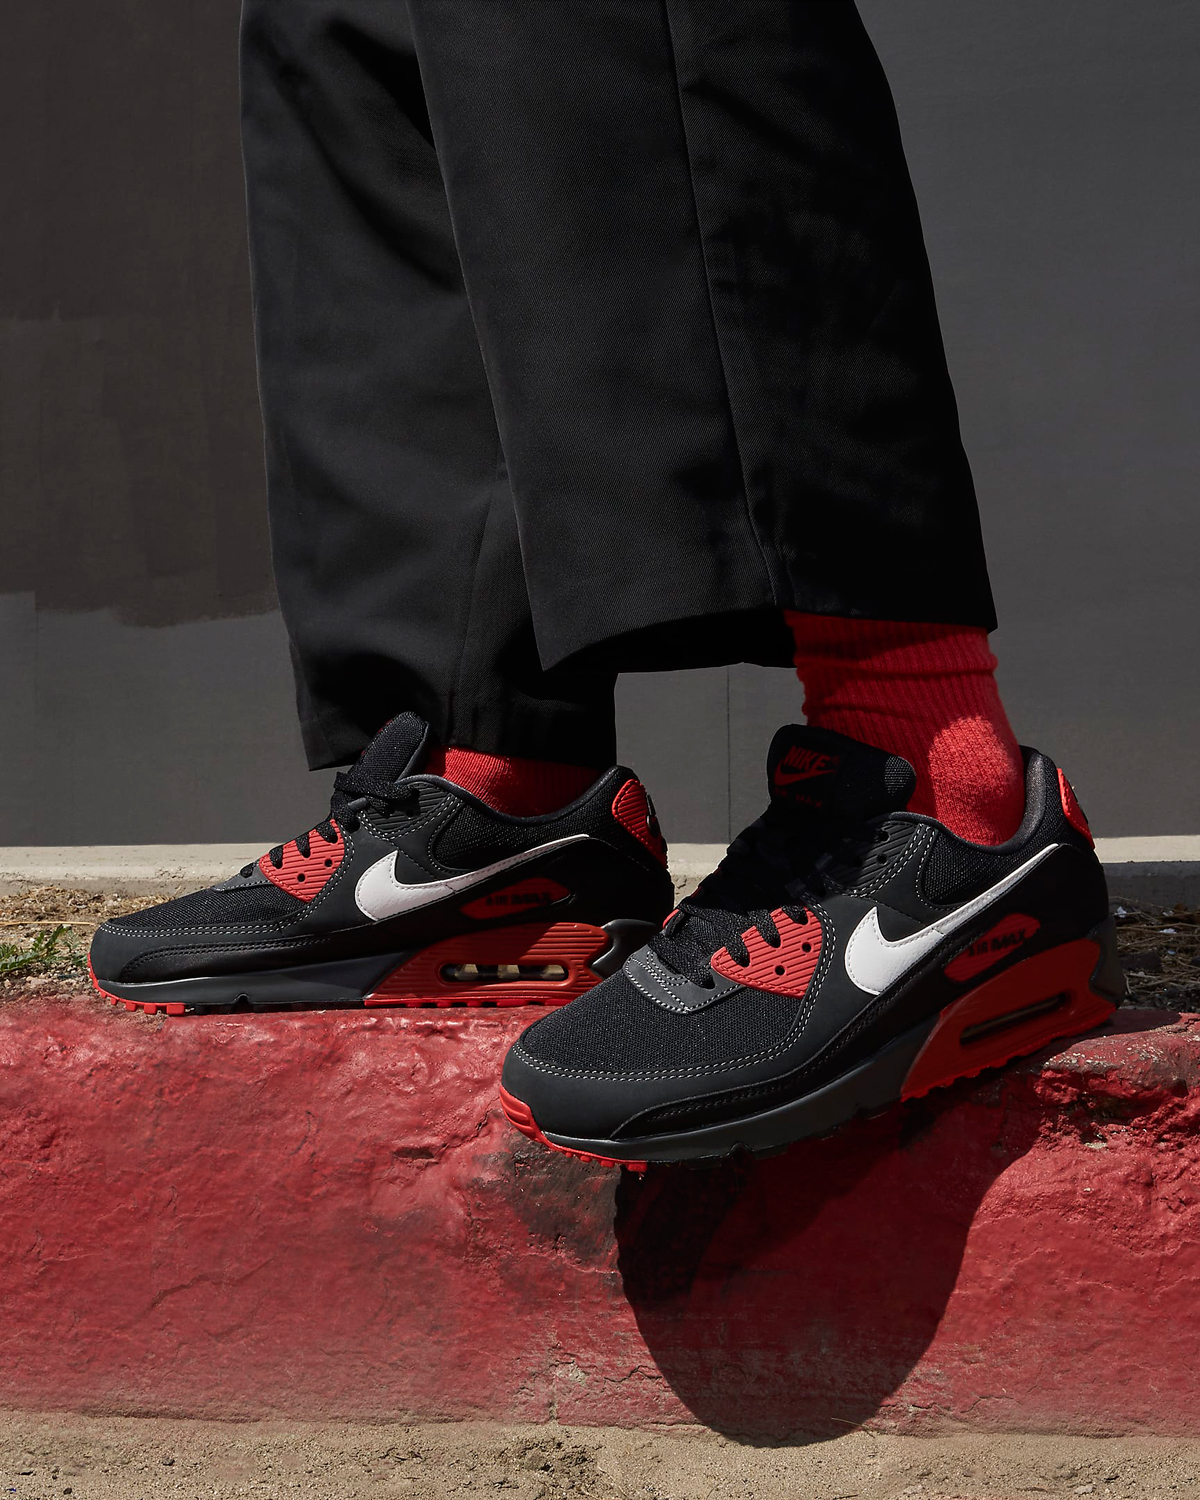 Nike-Air-Max-90-Anthracite-Black-Mystic-Red-On-Feet